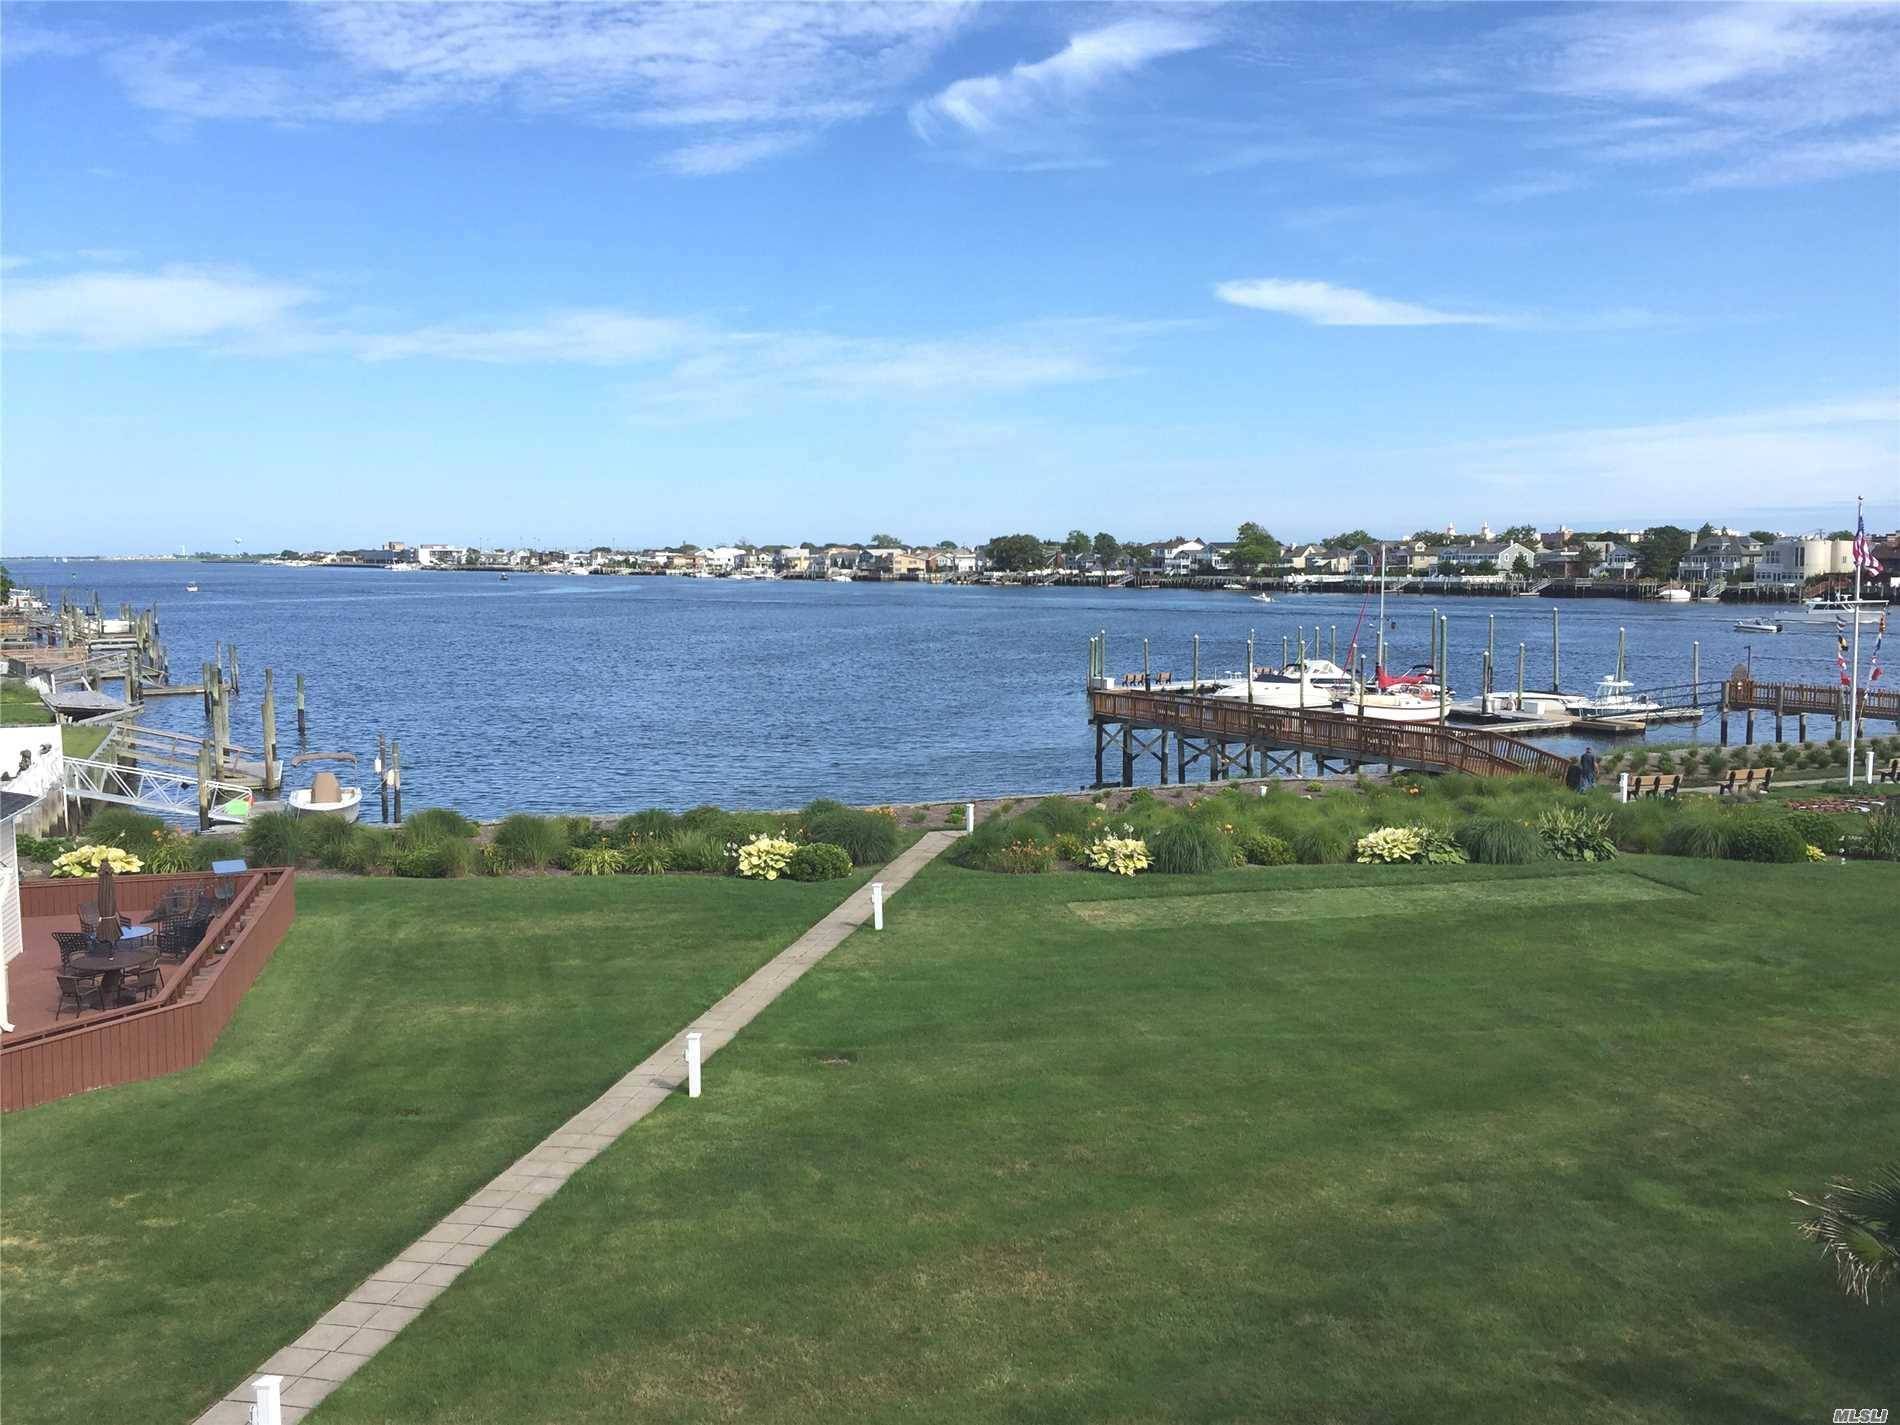 Stunning Waterfront Townhouse Community W 24 Hr Security Boat Slips Tennis Heated Pool Gorgeous 2-3 Br 2.